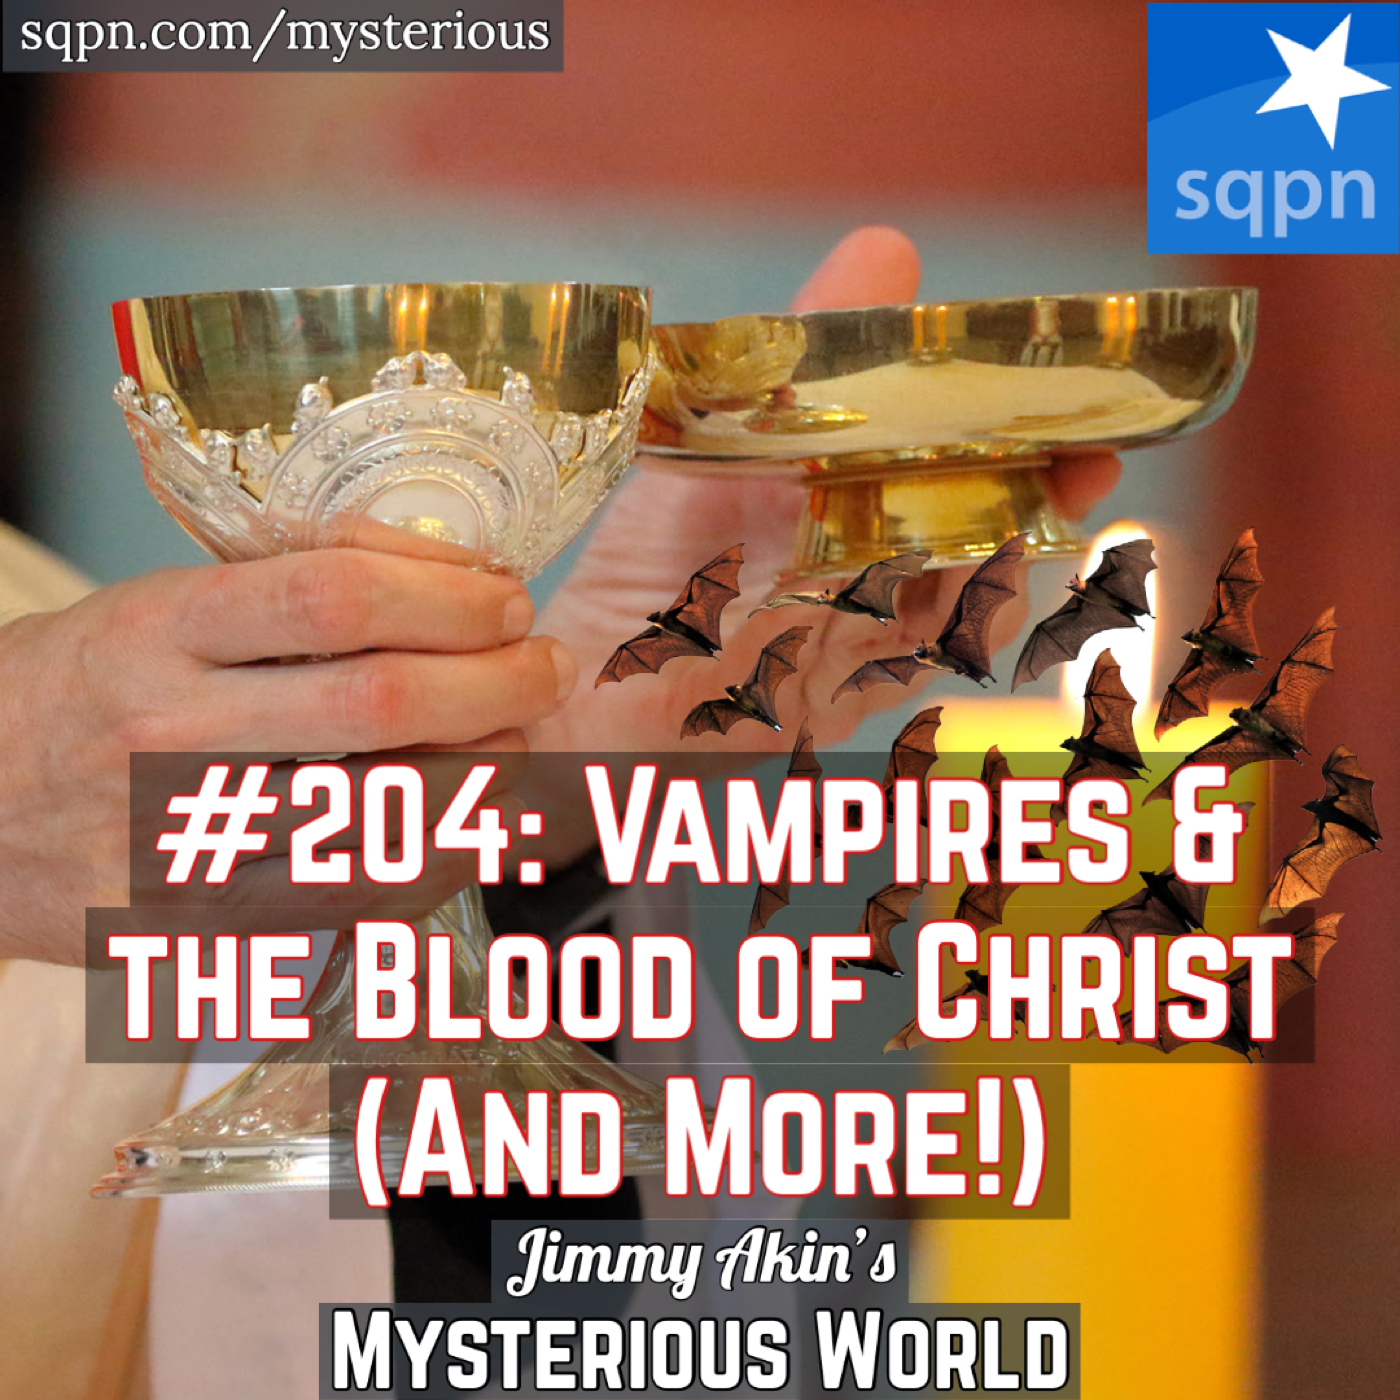 Vampires and the Blood of Christ, Robots and the Undead, Demons and Telepathy (Weird Questions!)